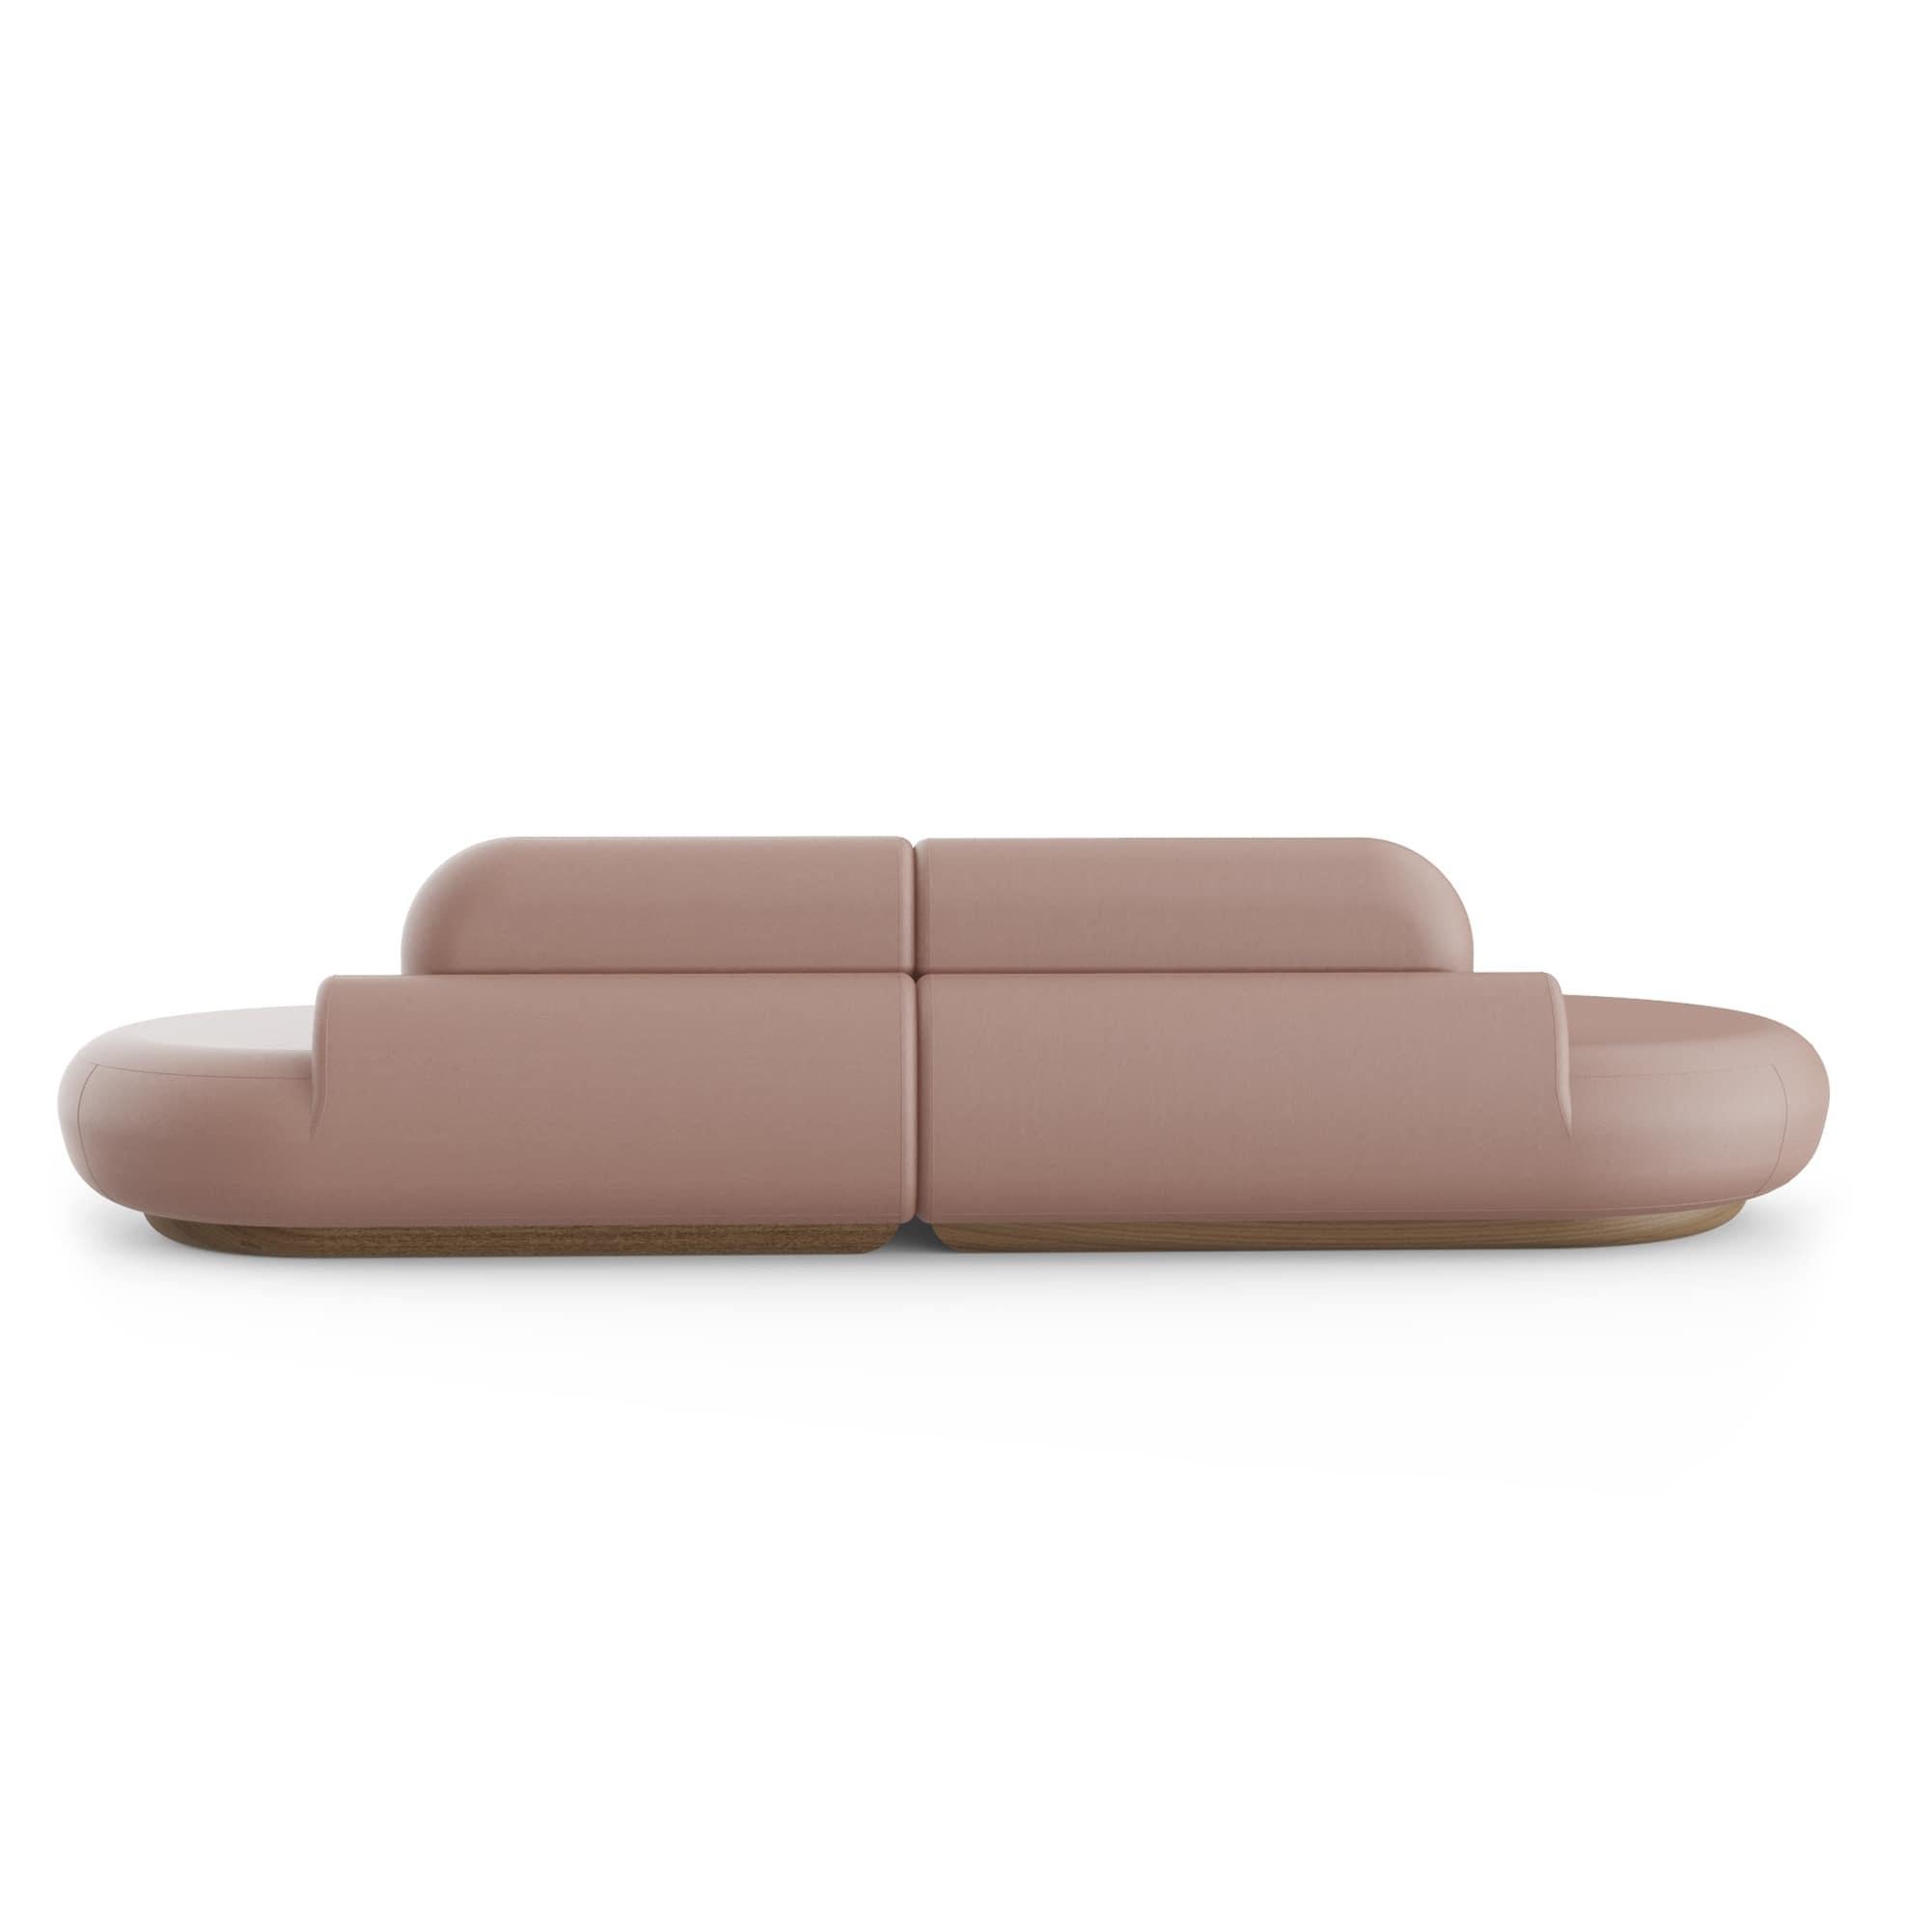 Portuguese Naked Sofa by Dooq